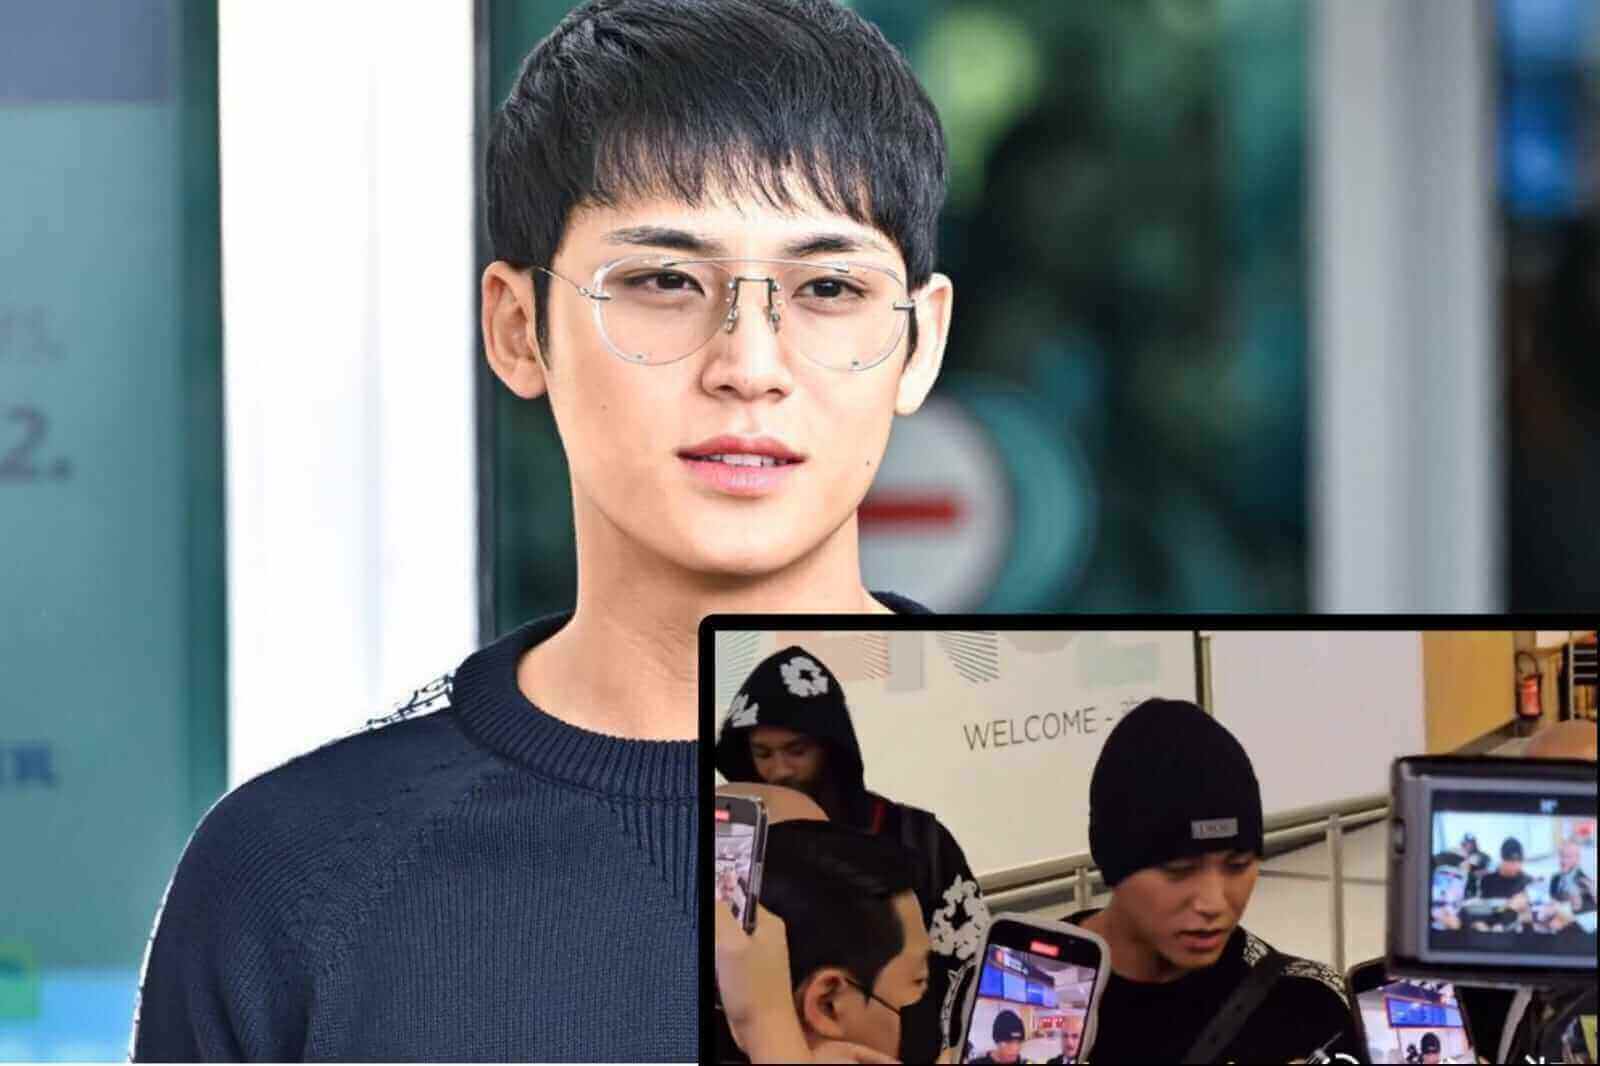 Chaos in Paris: SEVENTEEN's Mingyu Swarmed by Eager Fans At Airpor